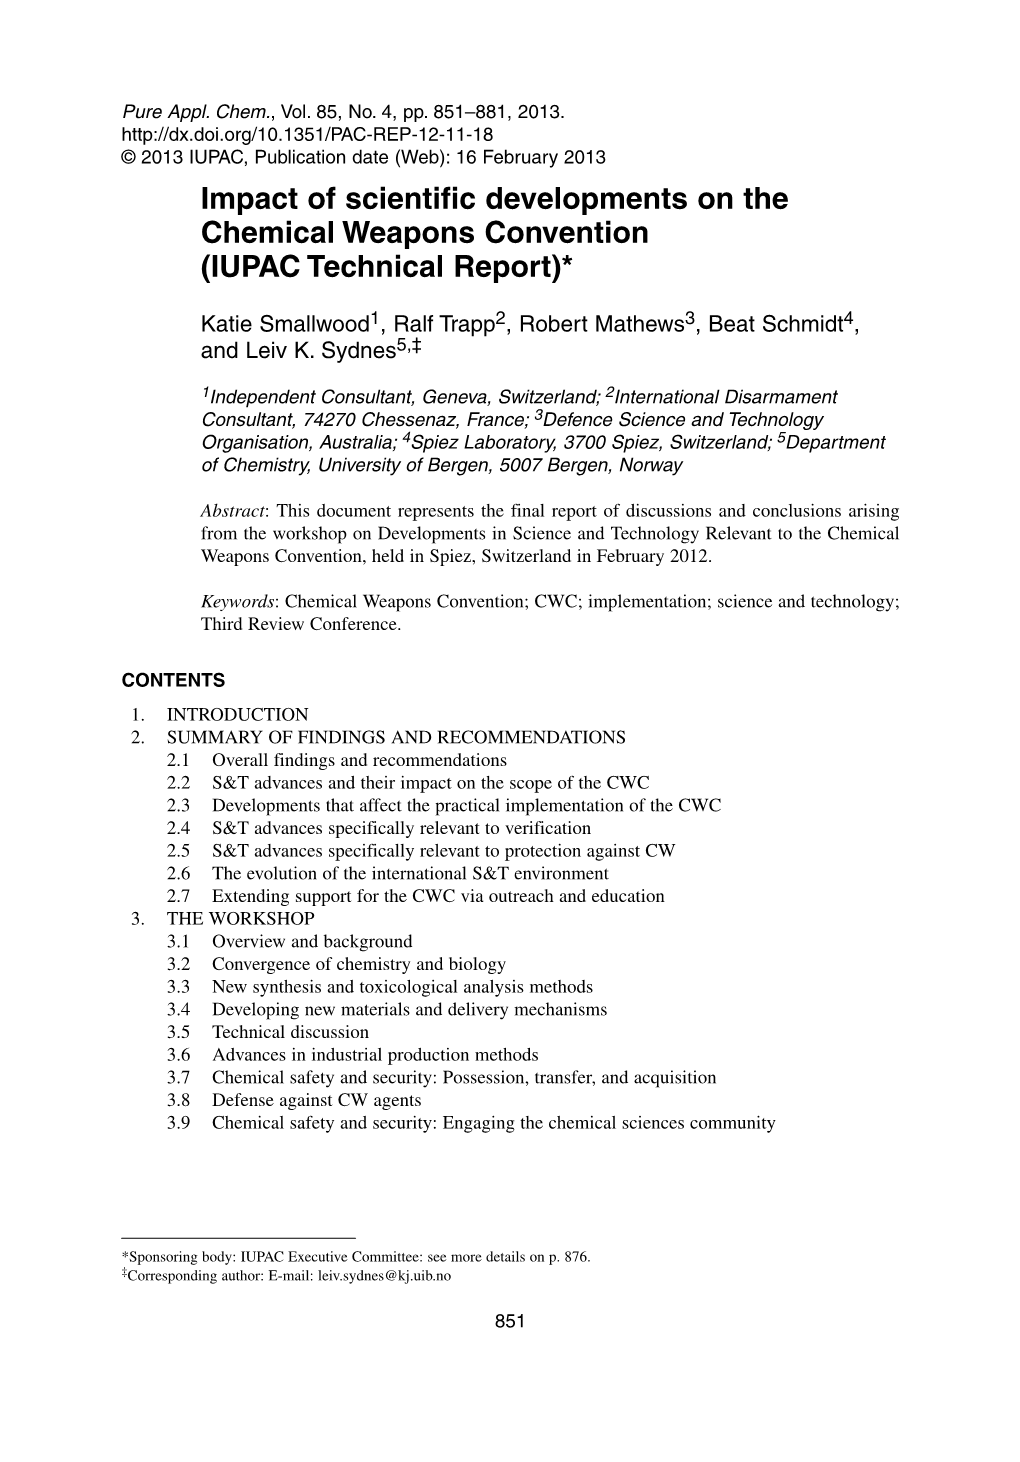 Impact of Scientific Developments on the Chemical Weapons Convention (IUPAC Technical Report)*